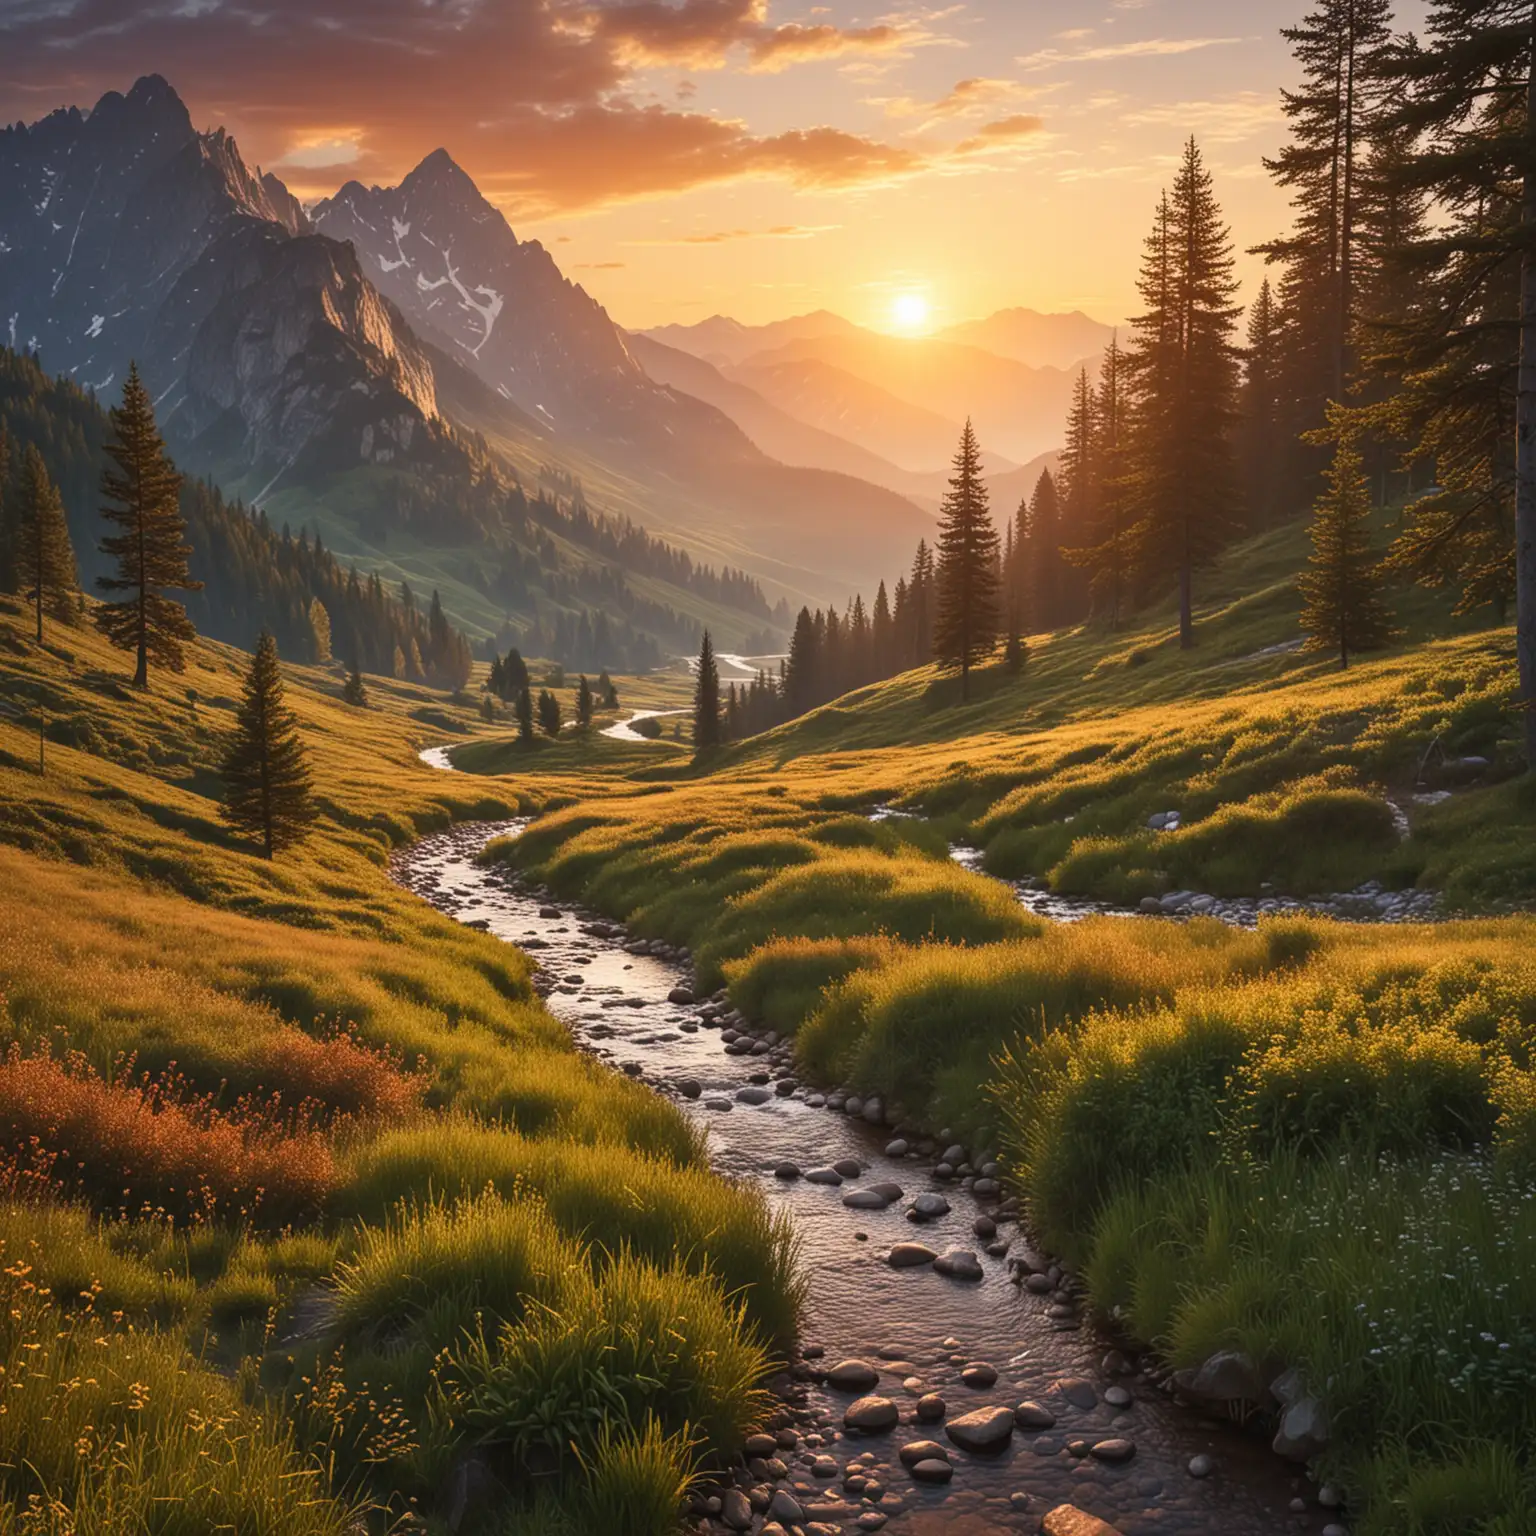 Scenic Mountain Landscape at Sunset with Forest and Stream